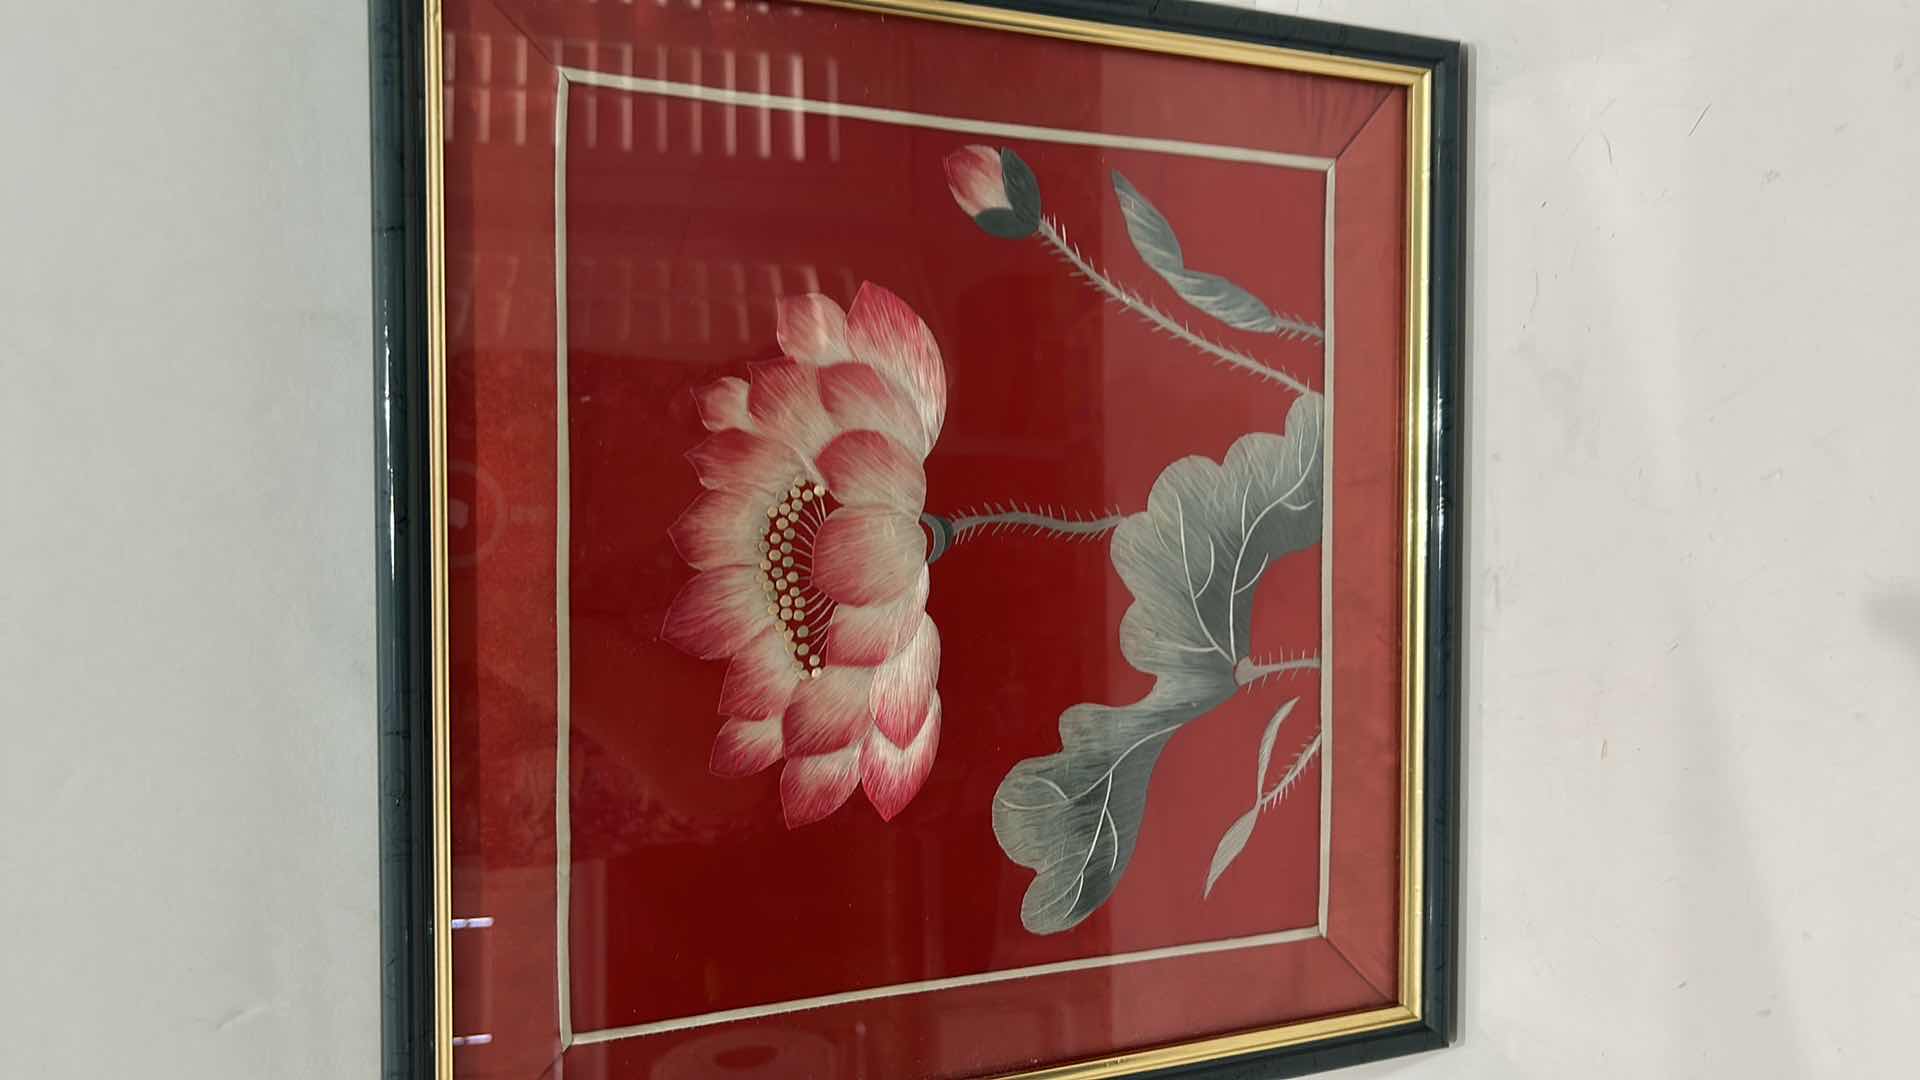 Photo 3 of ANTIQUE CHINESE TEXTILE FABRIC, SILK WITH SILK THREAD HAND EMBROIDERY ARTWORK FRAMED 13 1/2” x 13 1/2”